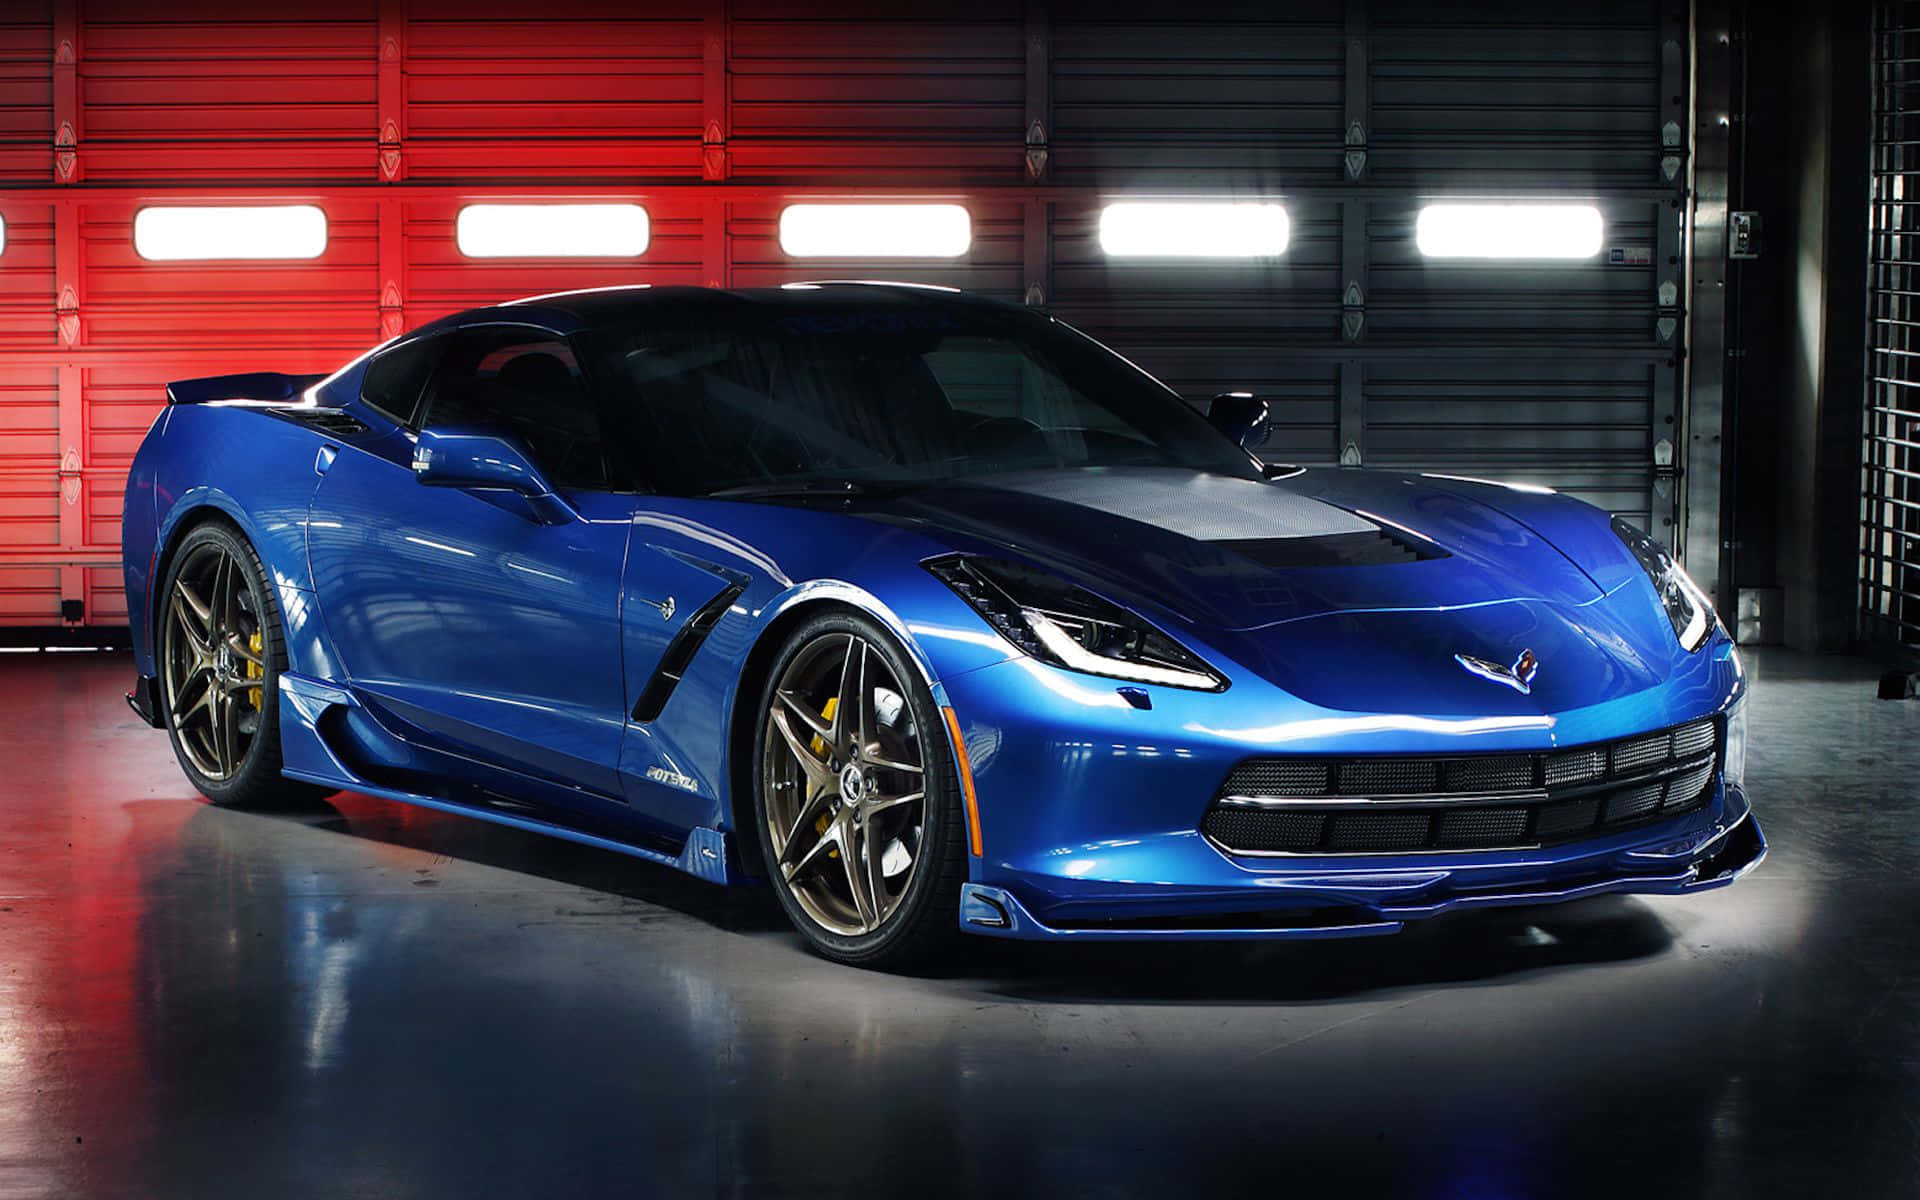 Make a statement with the renowned Corvette